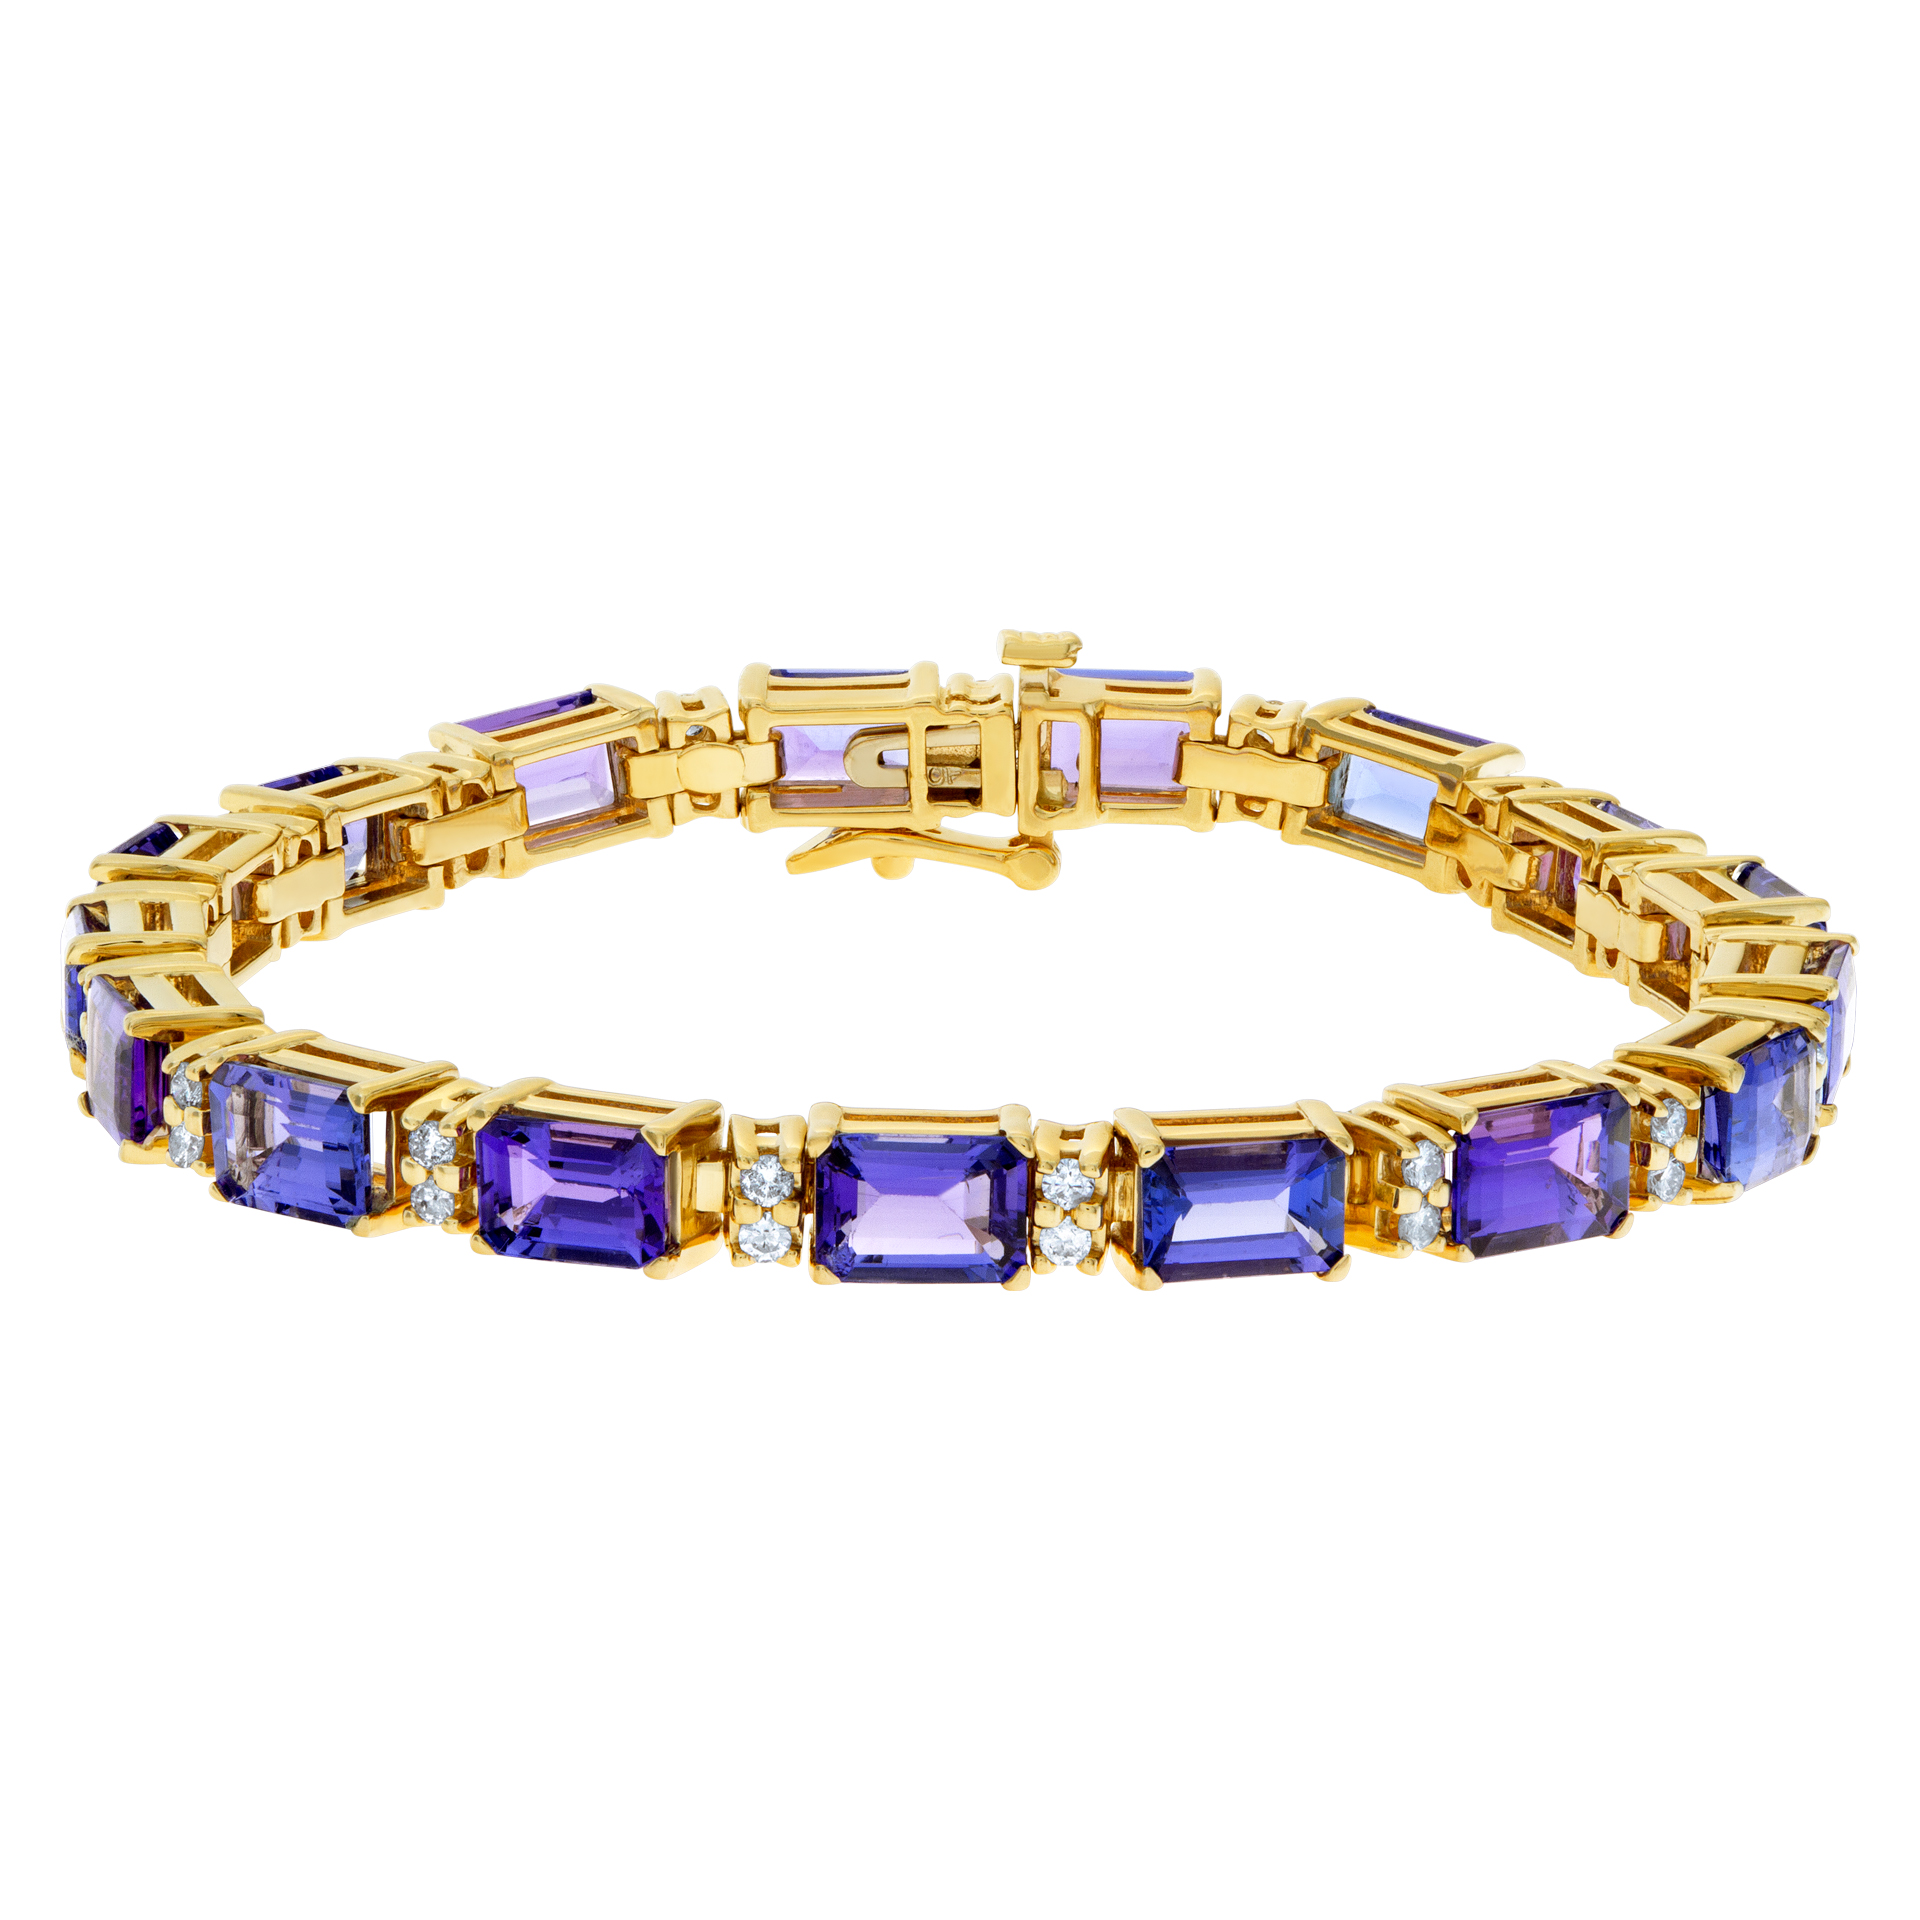 14k bracelet with 16.8 cts in tanzenite and 0.8 carats in diamonds